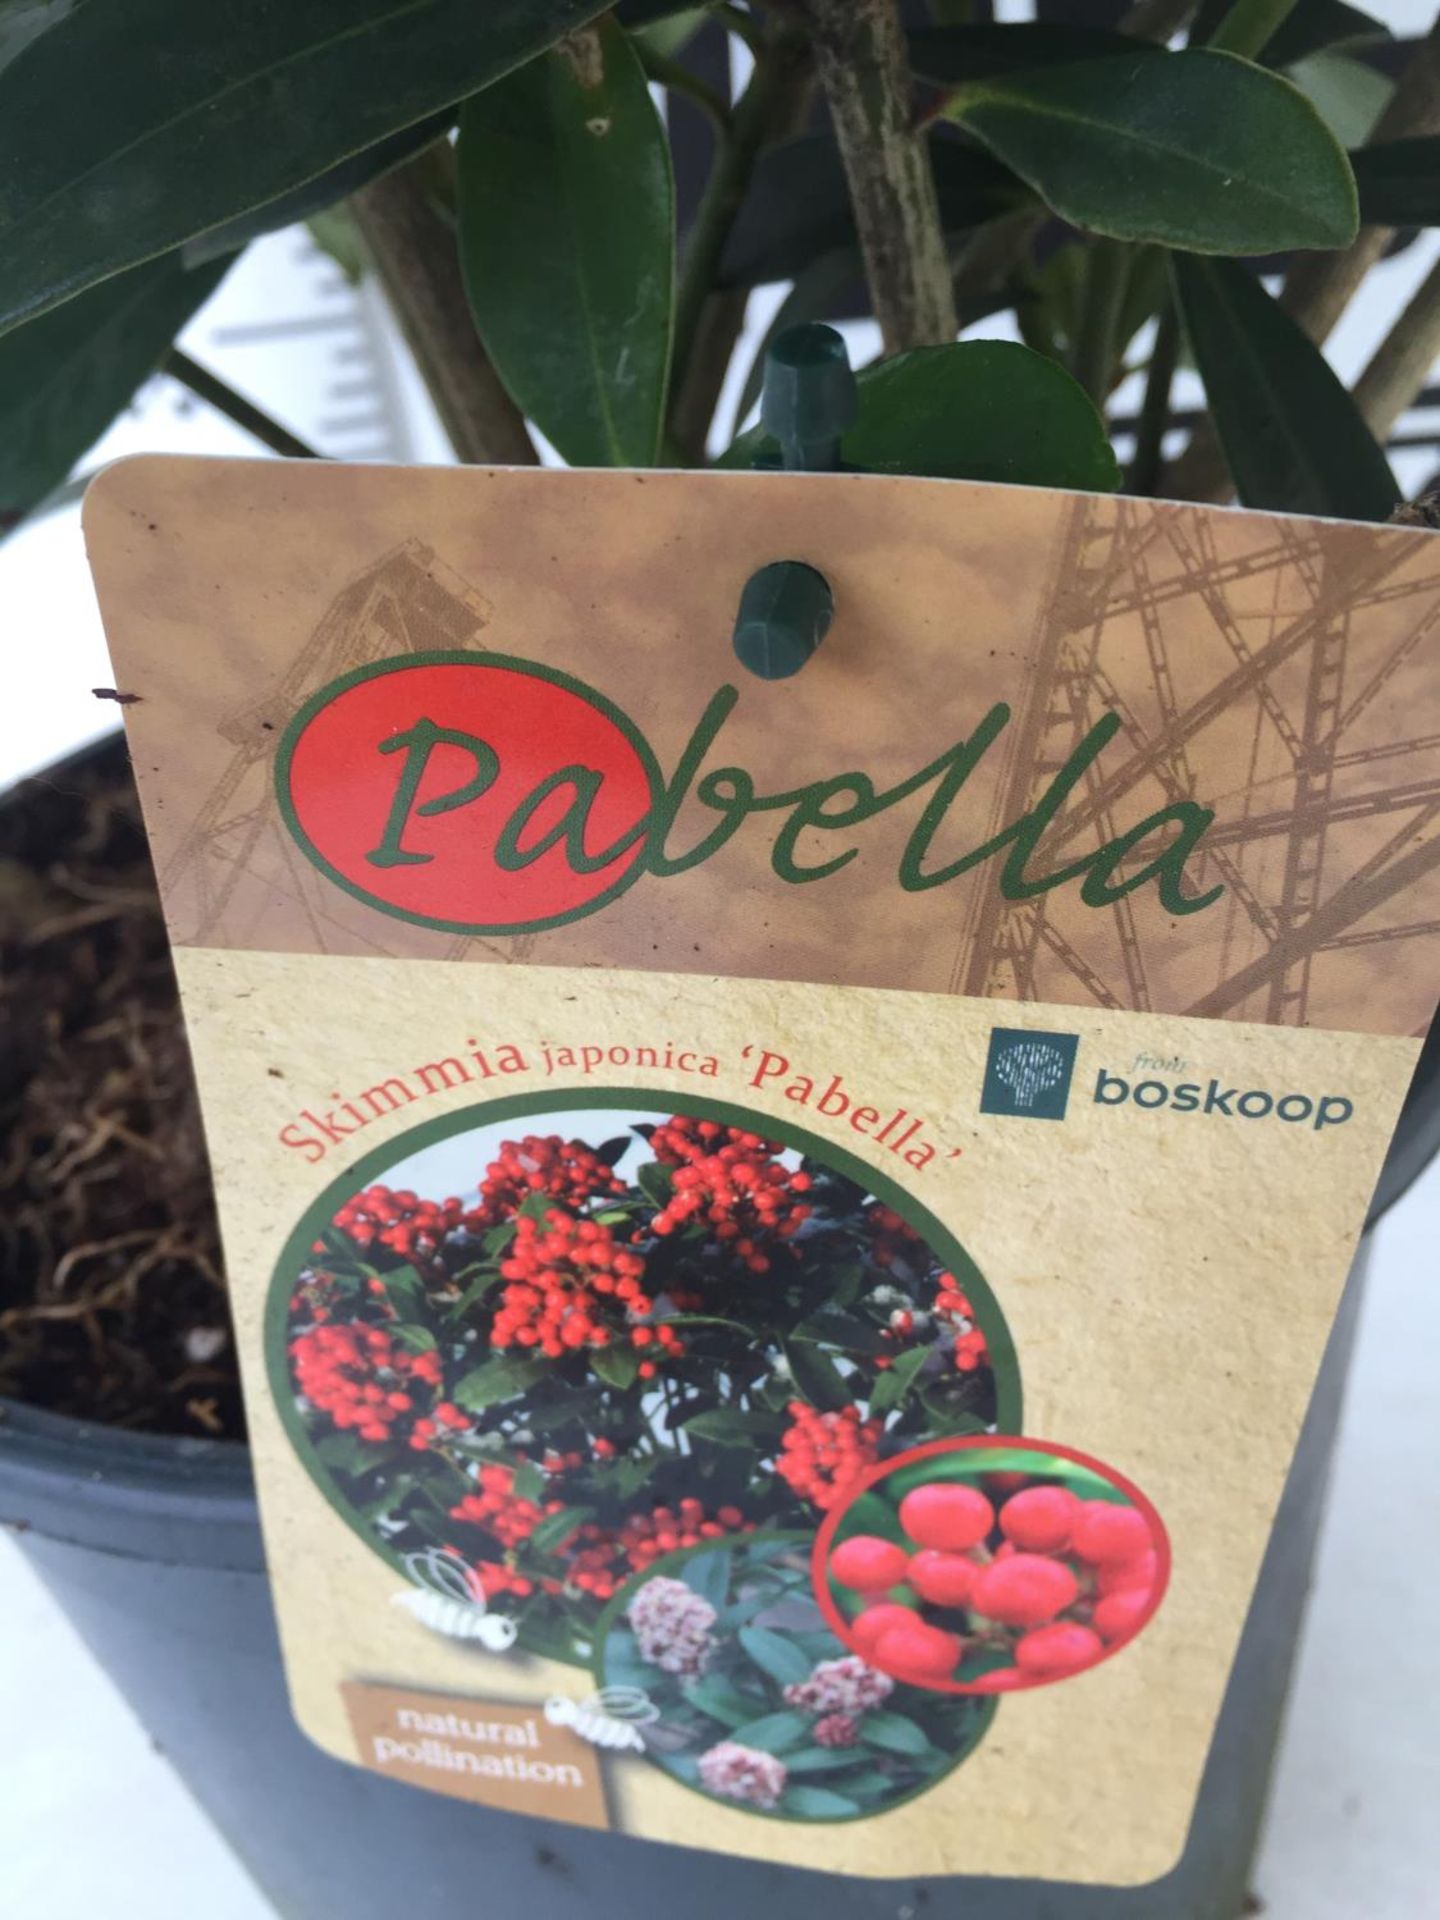 ONE LARGE SKIMMIA JAPONICA 'PABELLA' PLANT IN 5 LTR POT APPROX 75CM IN HEIGHT PLUS VAT - Image 6 of 7